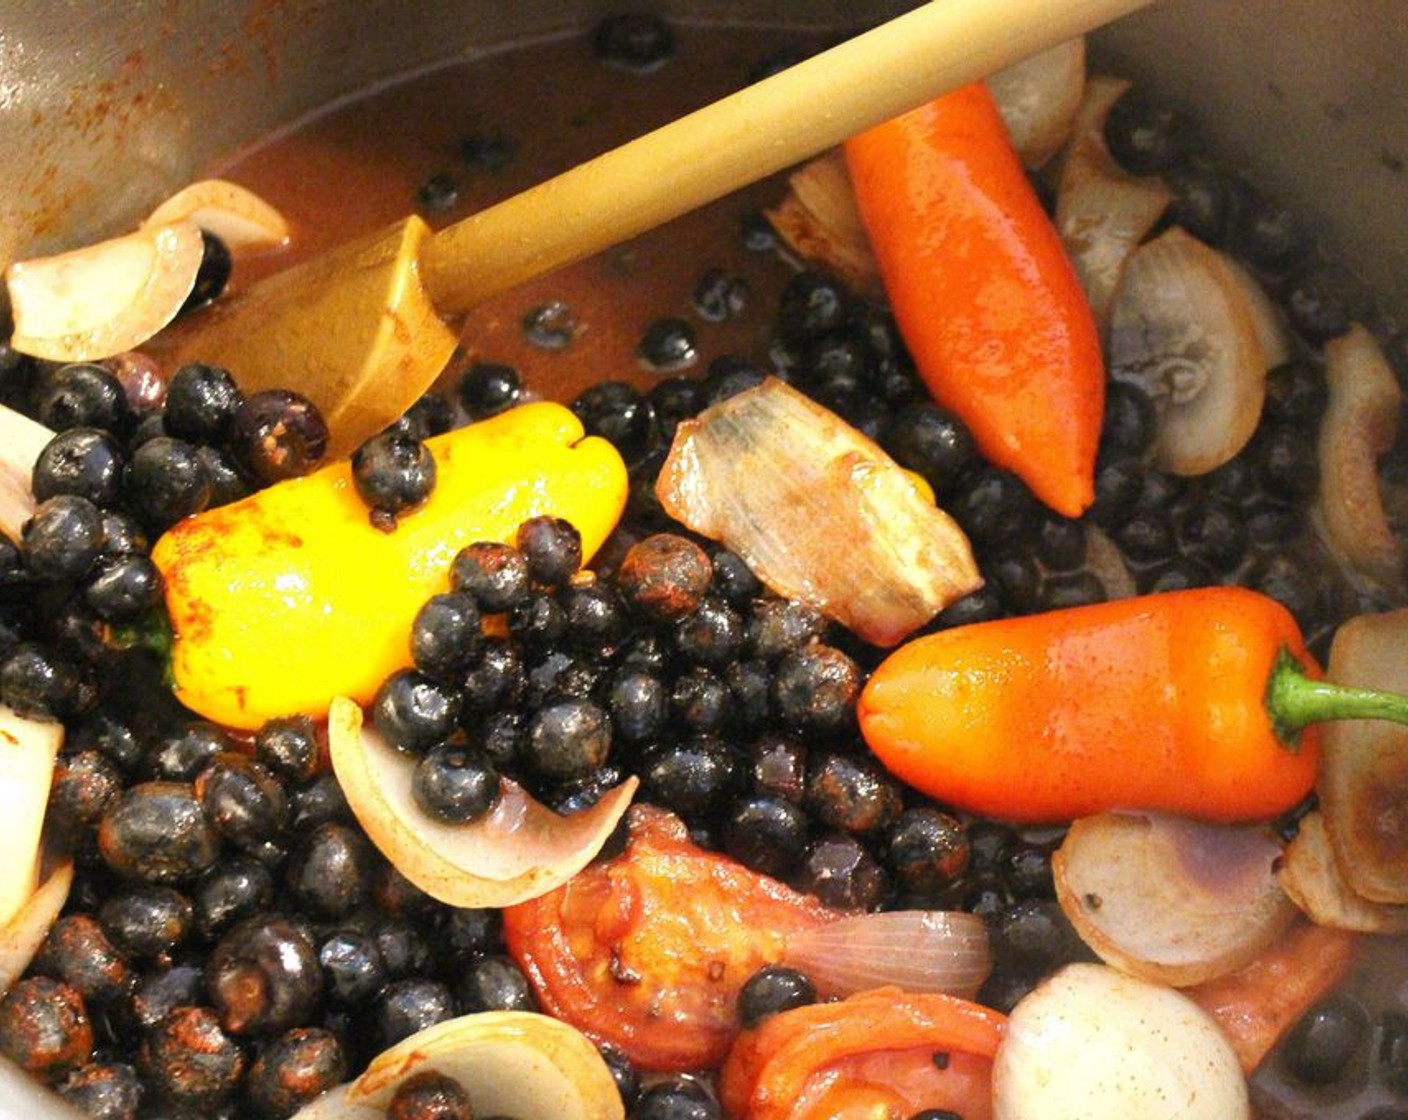 step 5 Add Fresh Blueberries (2 cups), Hungarian Paprika (1 cup), {@12:}, Bay Leaves (4), Whole Cloves (5), Juniper Berries (5), Granulated Sugar (2 Tbsp), {@10:}, Dried Oregano (1 Tbsp), Ground Coriander (1 Tbsp), Ground Cumin (1/2 Tbsp), Ground Black Pepper (1/2 Tbsp) and {@11:}.